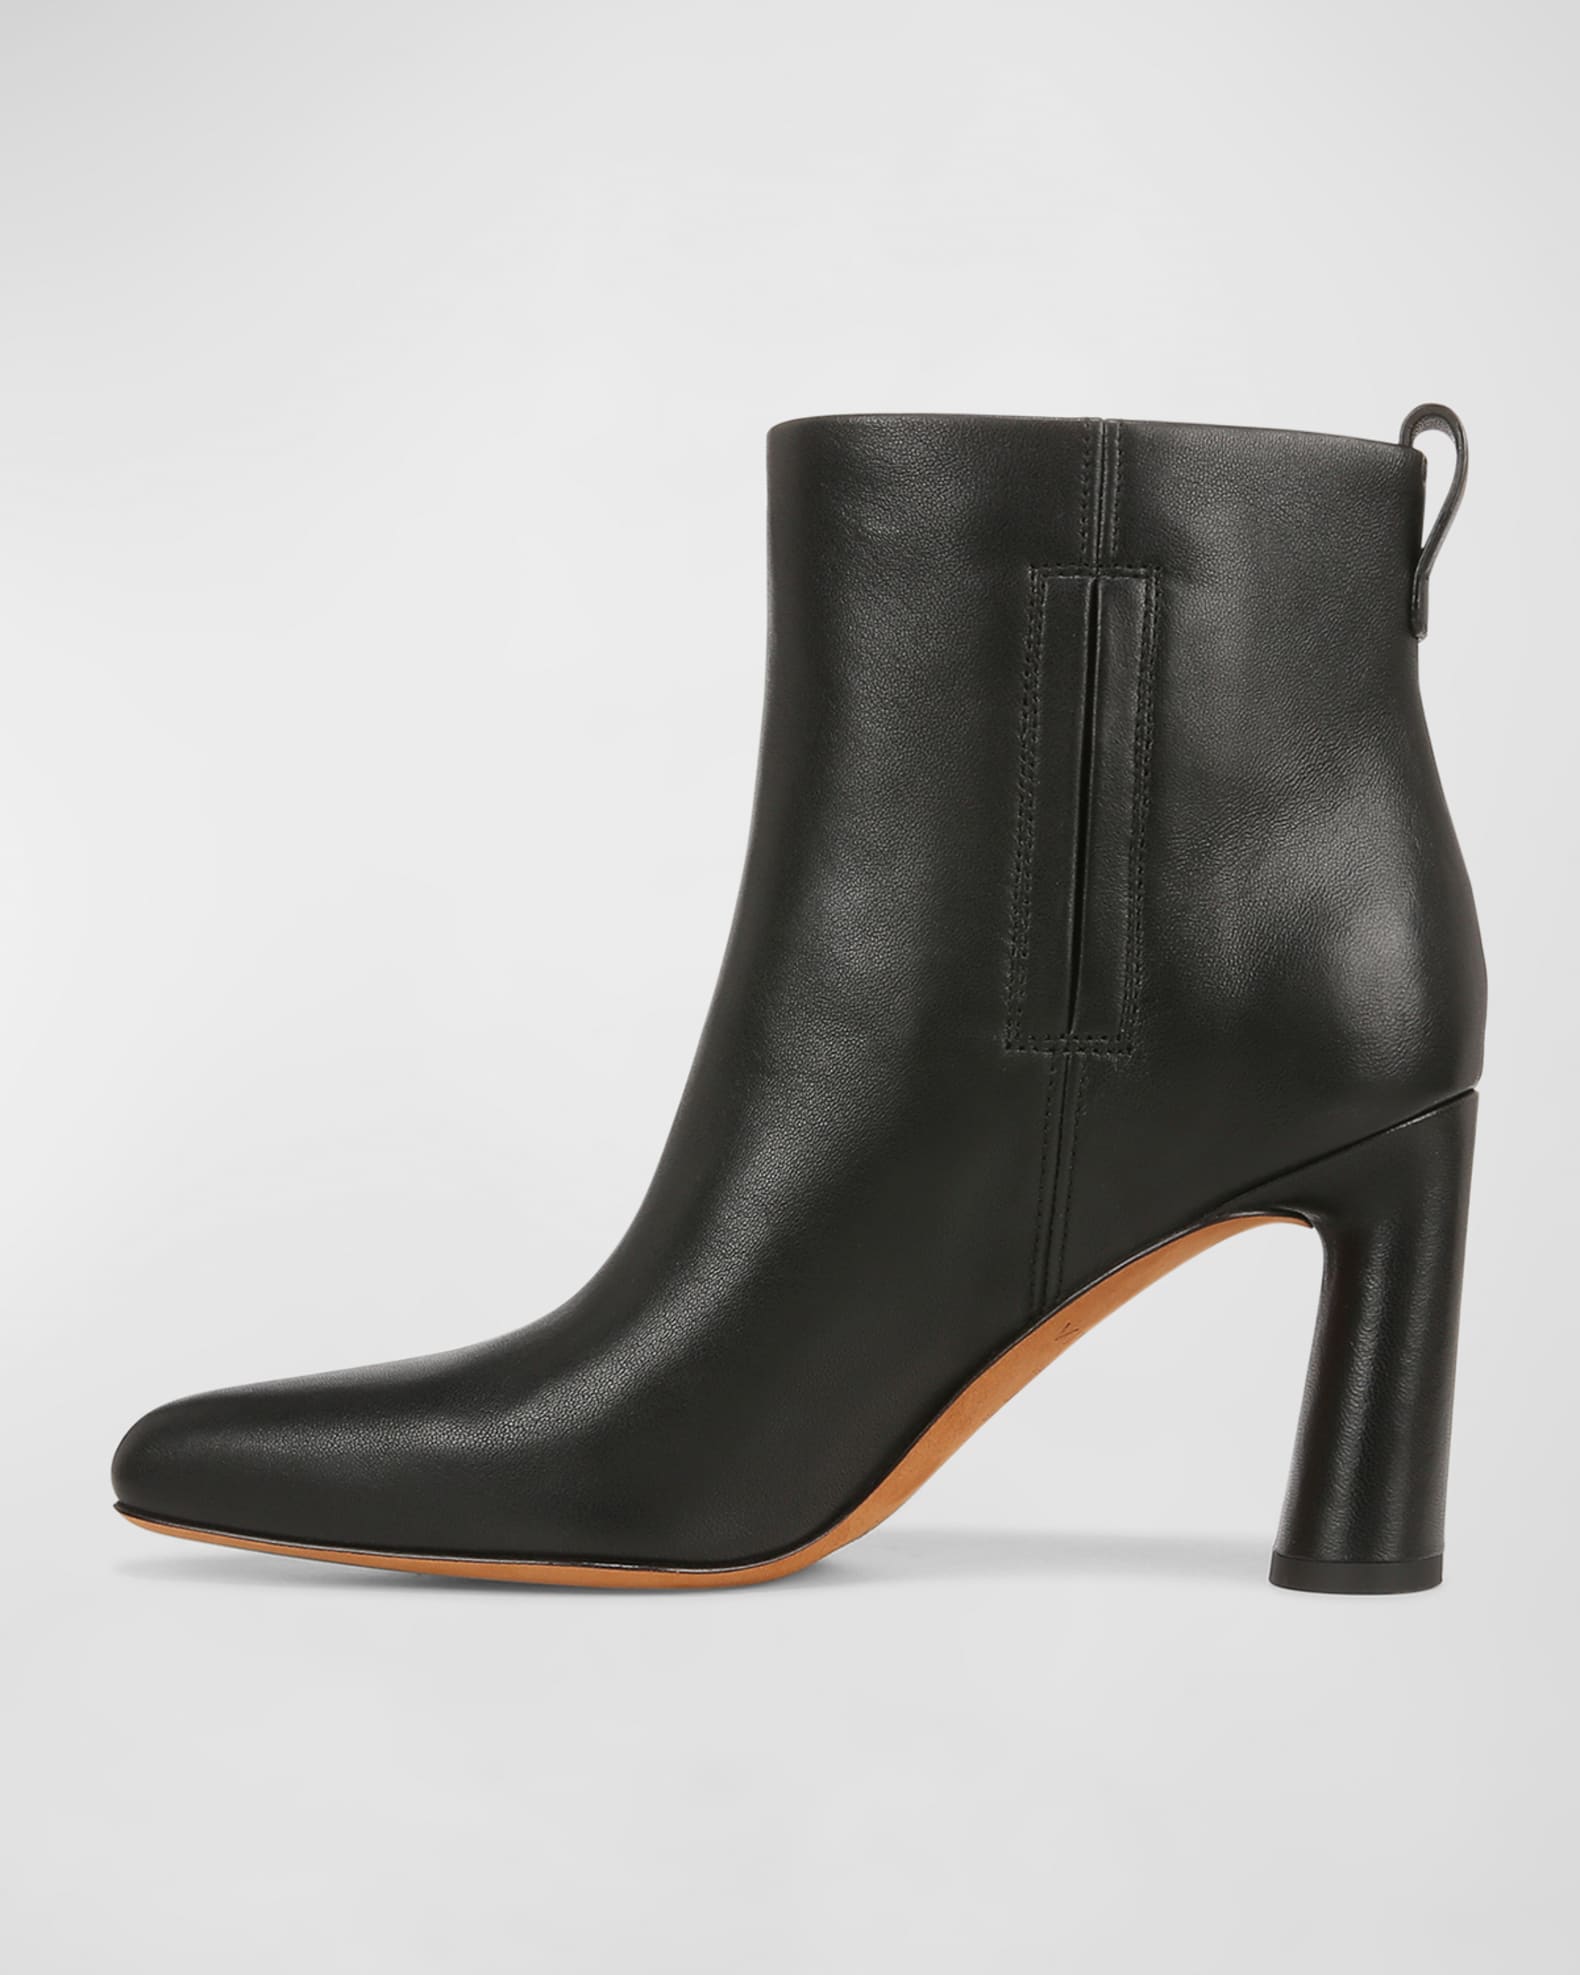 Vince Hillside Leather Ankle Booties | Neiman Marcus